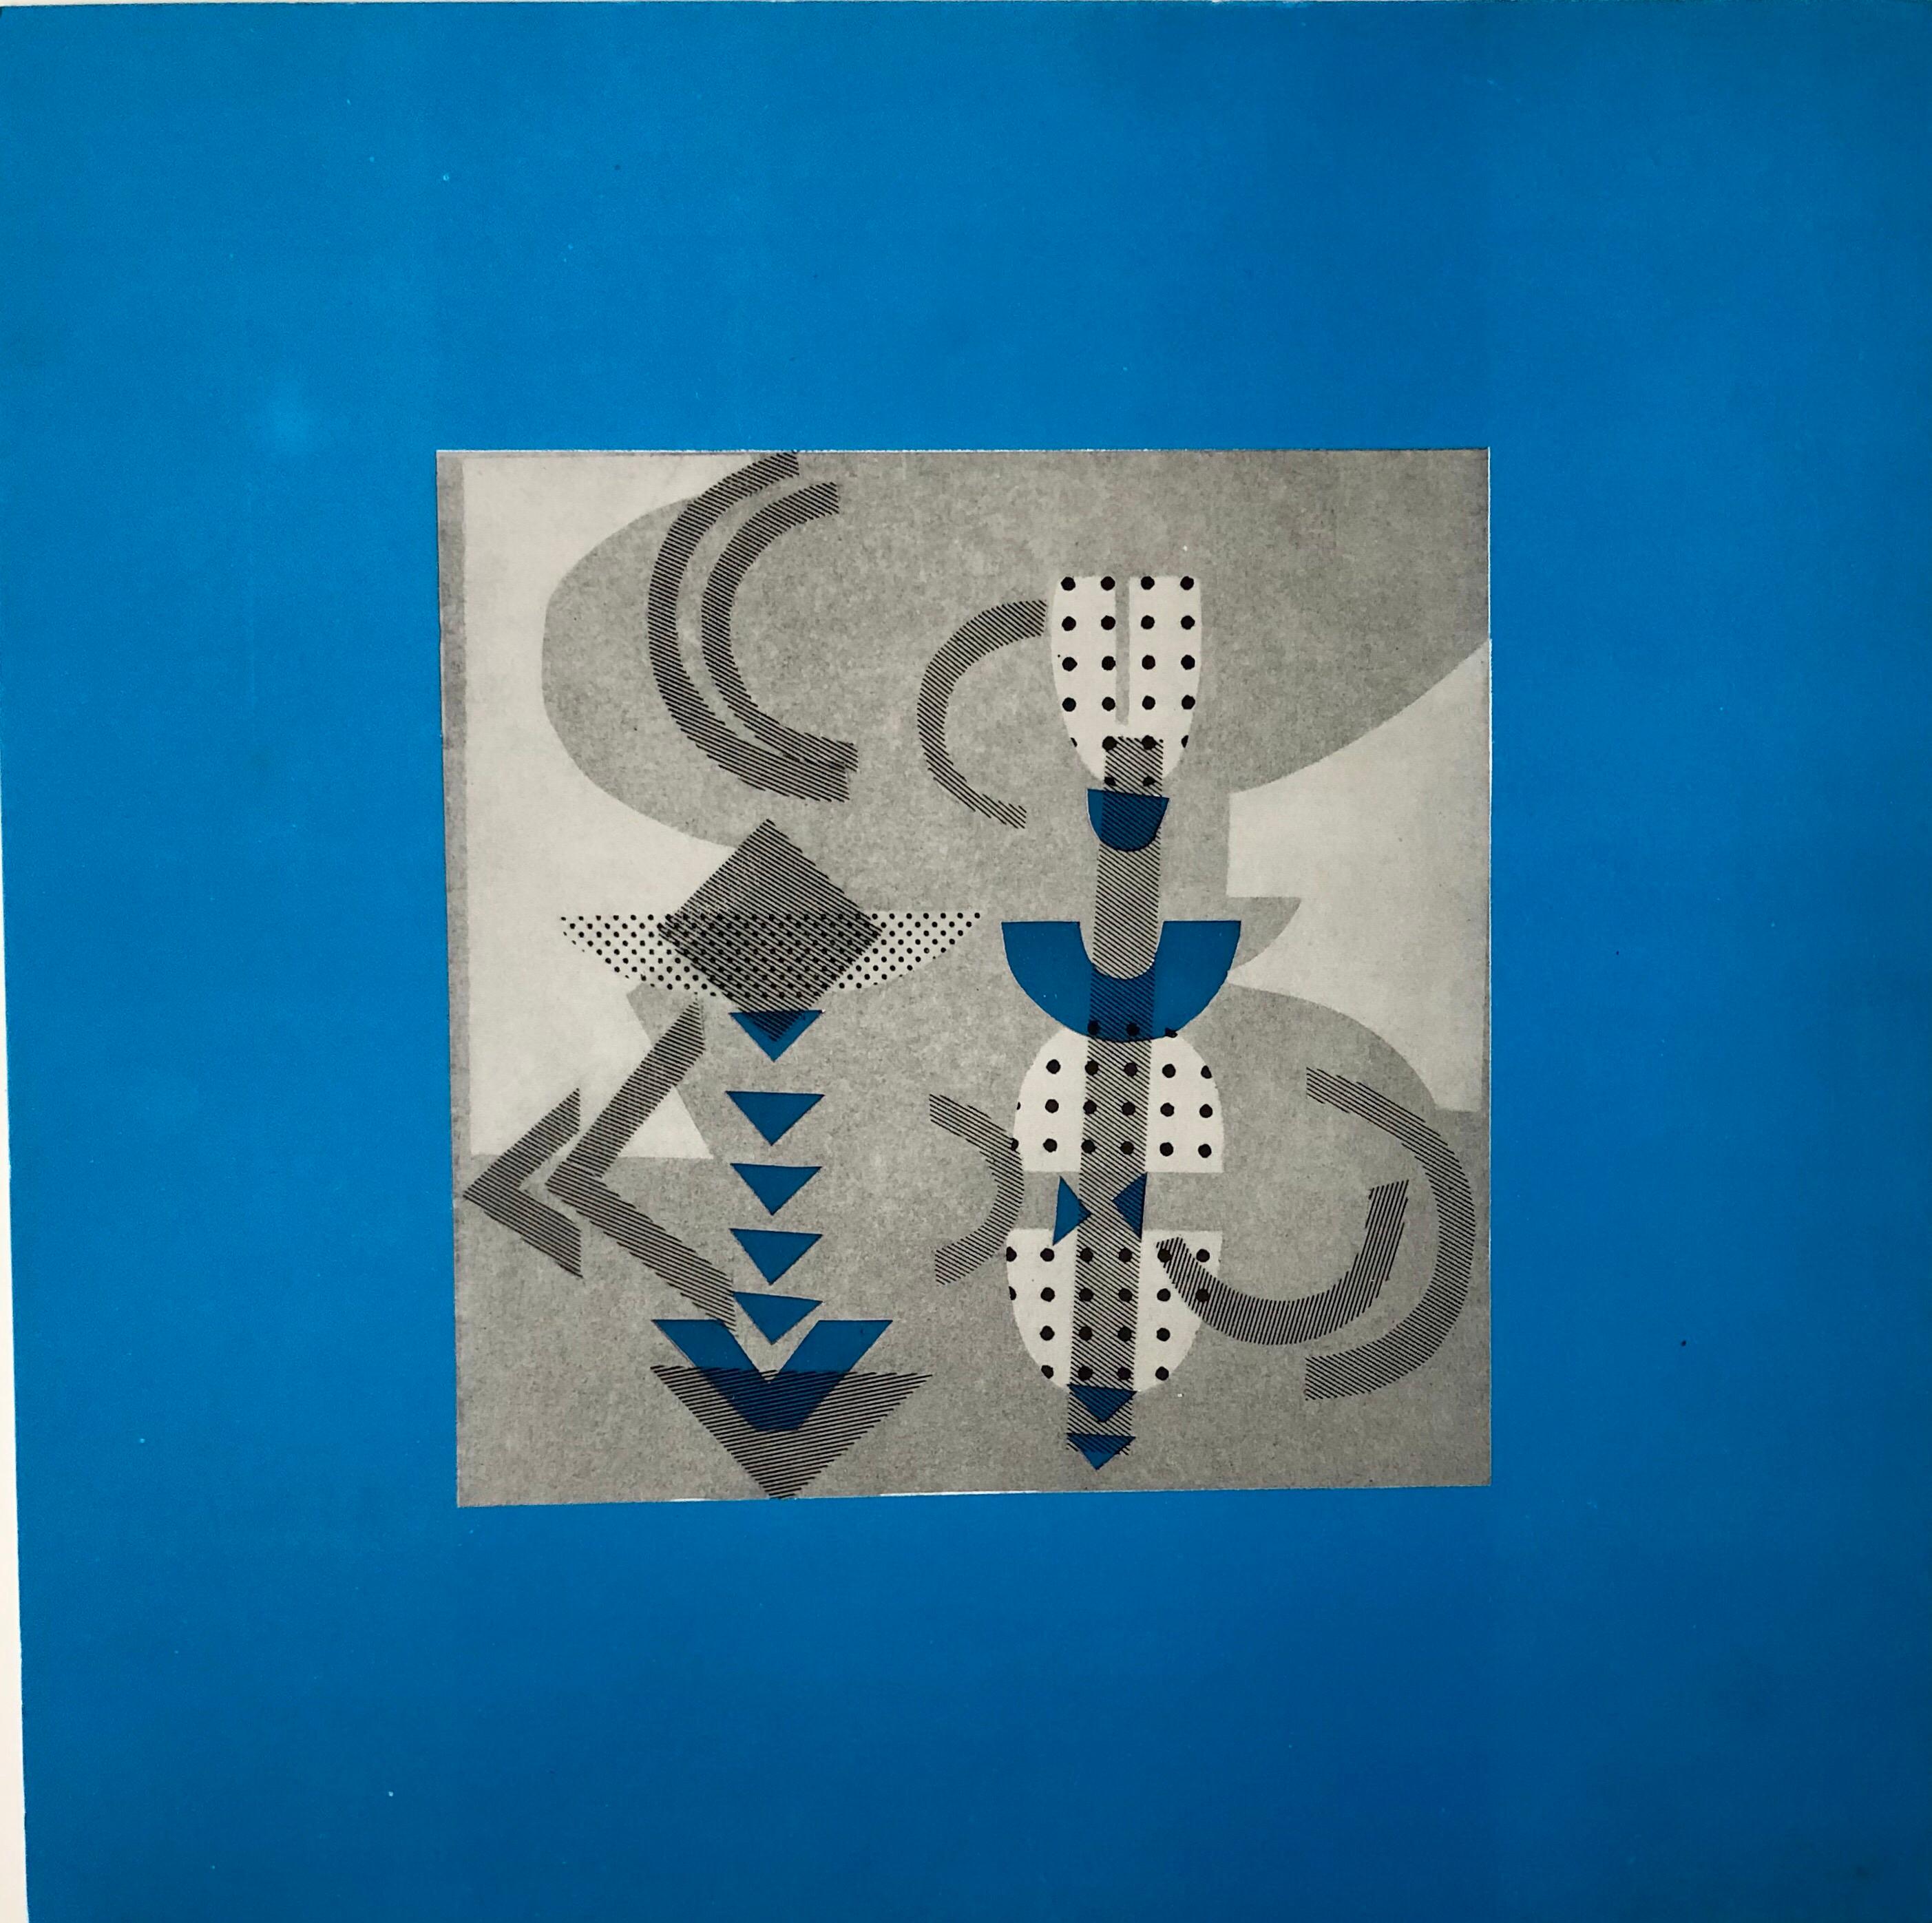 This is not signed or numbered. it is from a folio of prints.
Laura Fiume was born in Urbino, central Italy in 1953. Her education took place in Milan at the Liceo Artistico and at the Polytechnic School of Design. In 1976 she moved to Canzo, near